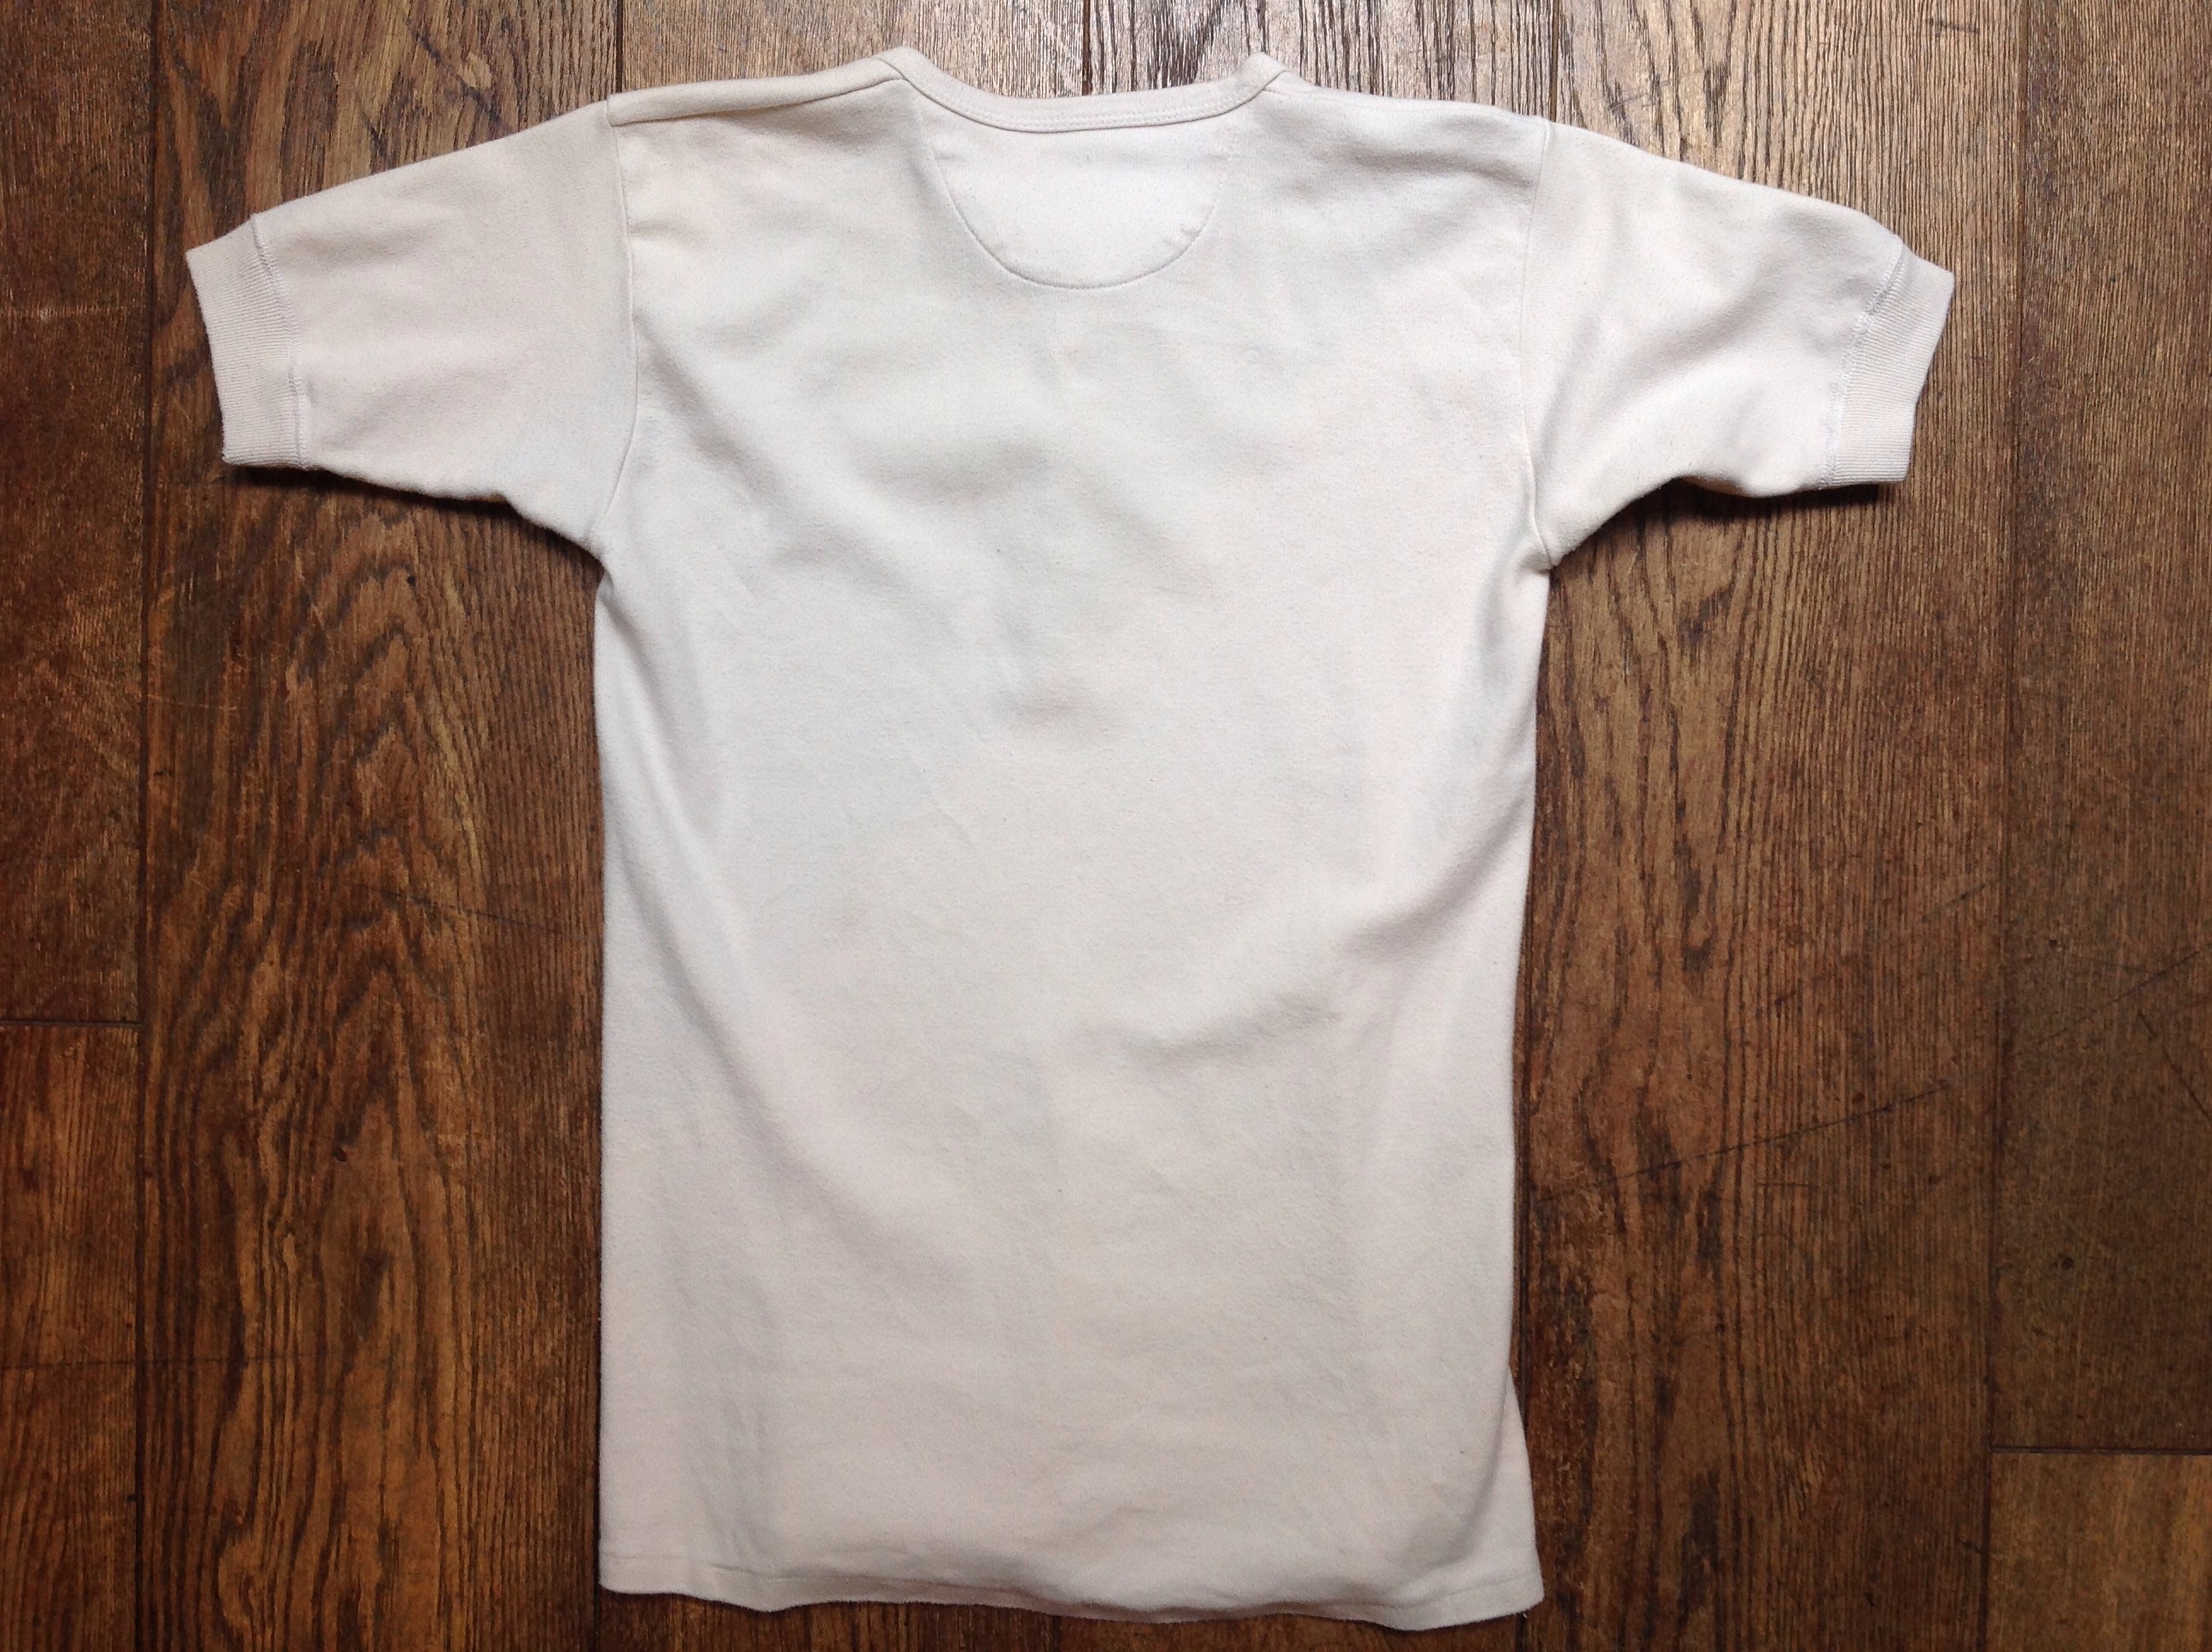 Vintage 1940s 40s white cotton reverse weave Henley top t shirt small ...